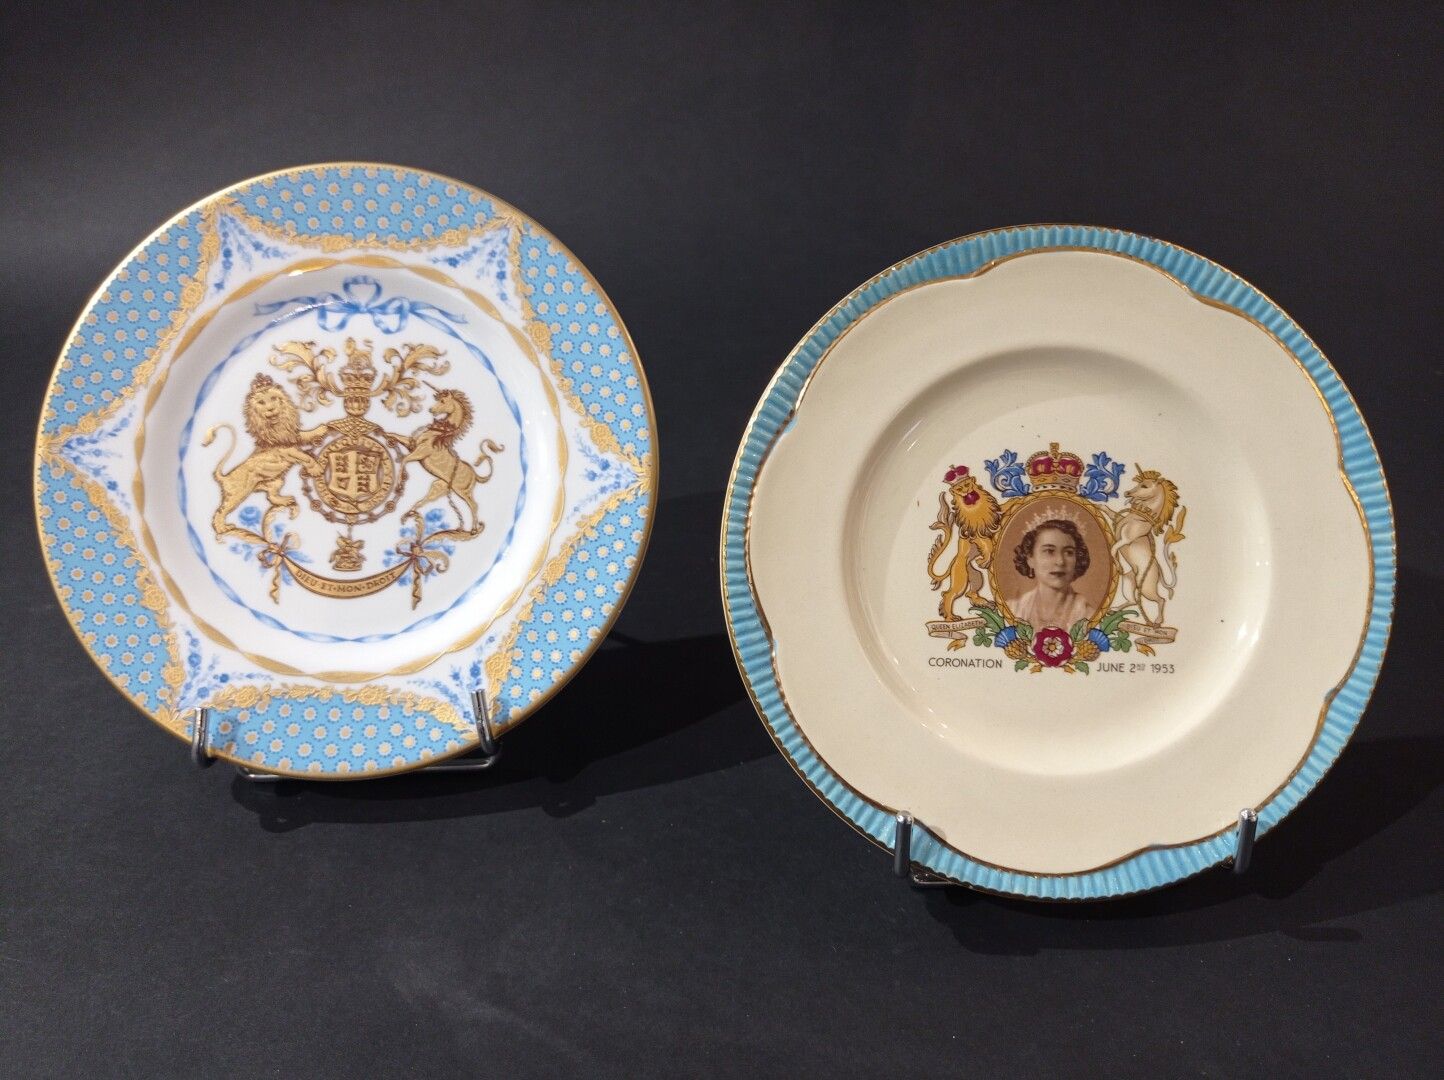 Null ENGLAND, 1953

Small plate commemorating the coronation of Her Majesty Quee&hellip;